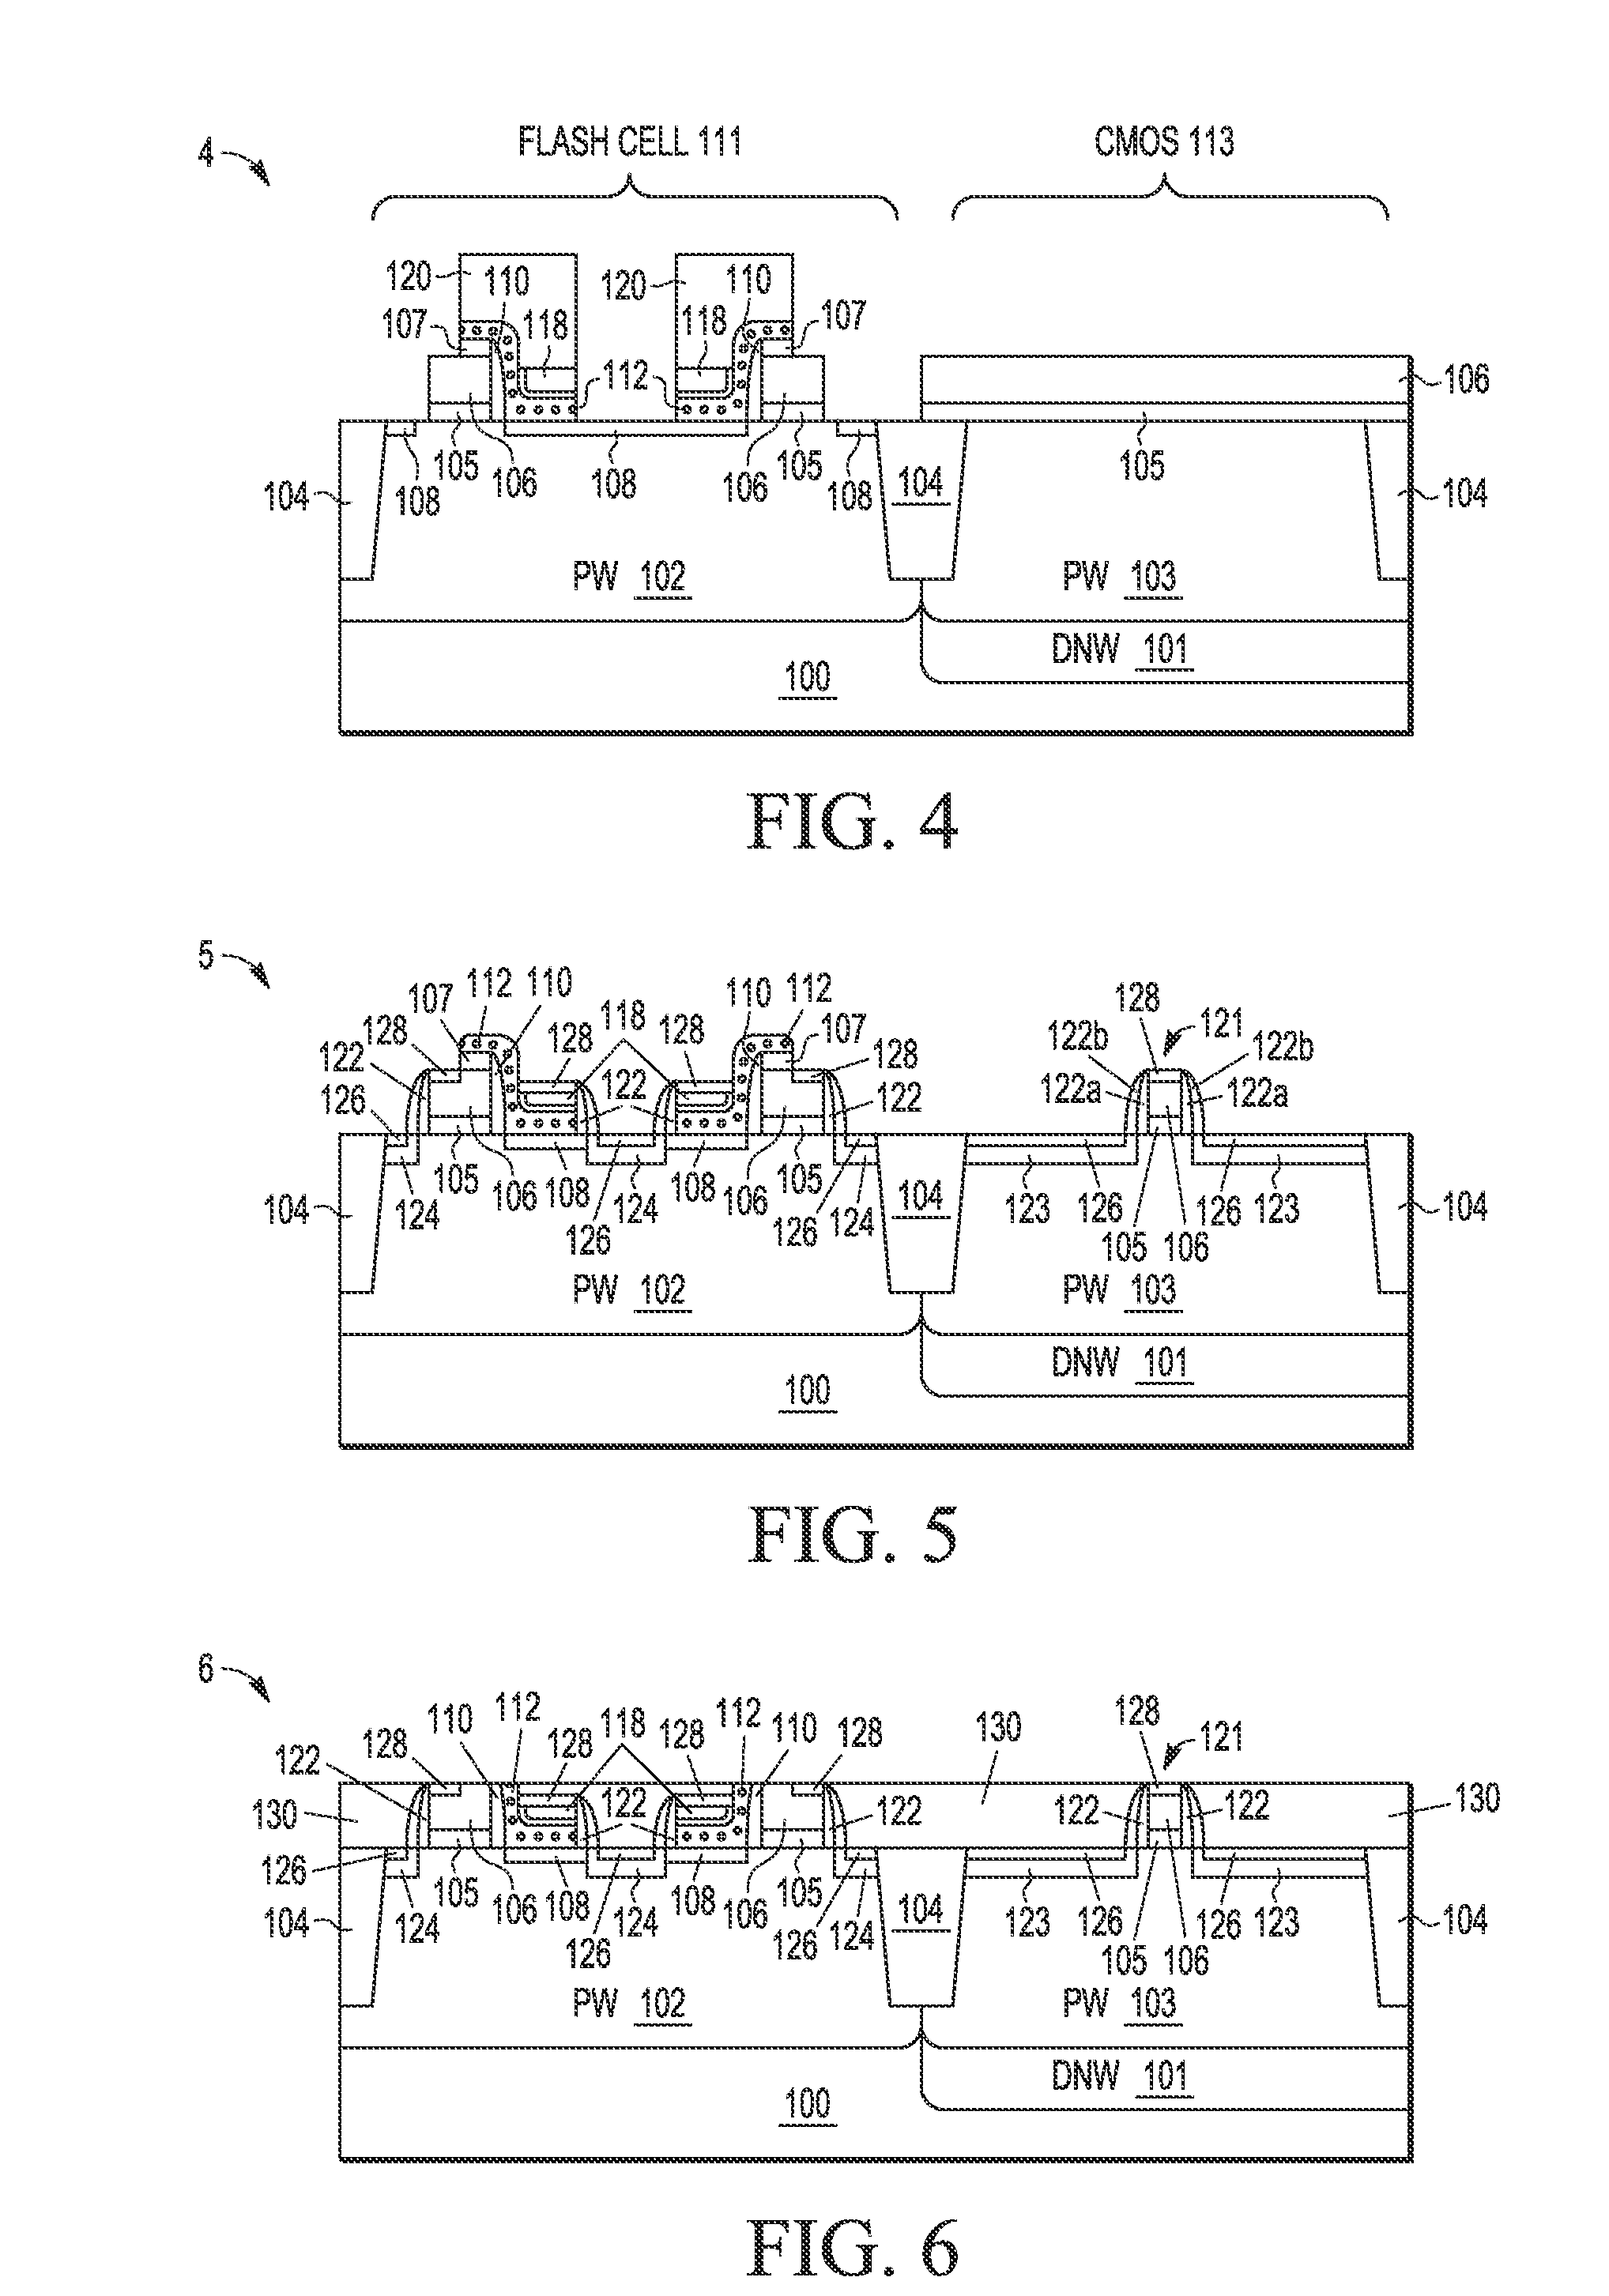 Nonvolatile Memory Bitcell With Inlaid High K Metal Select Gate